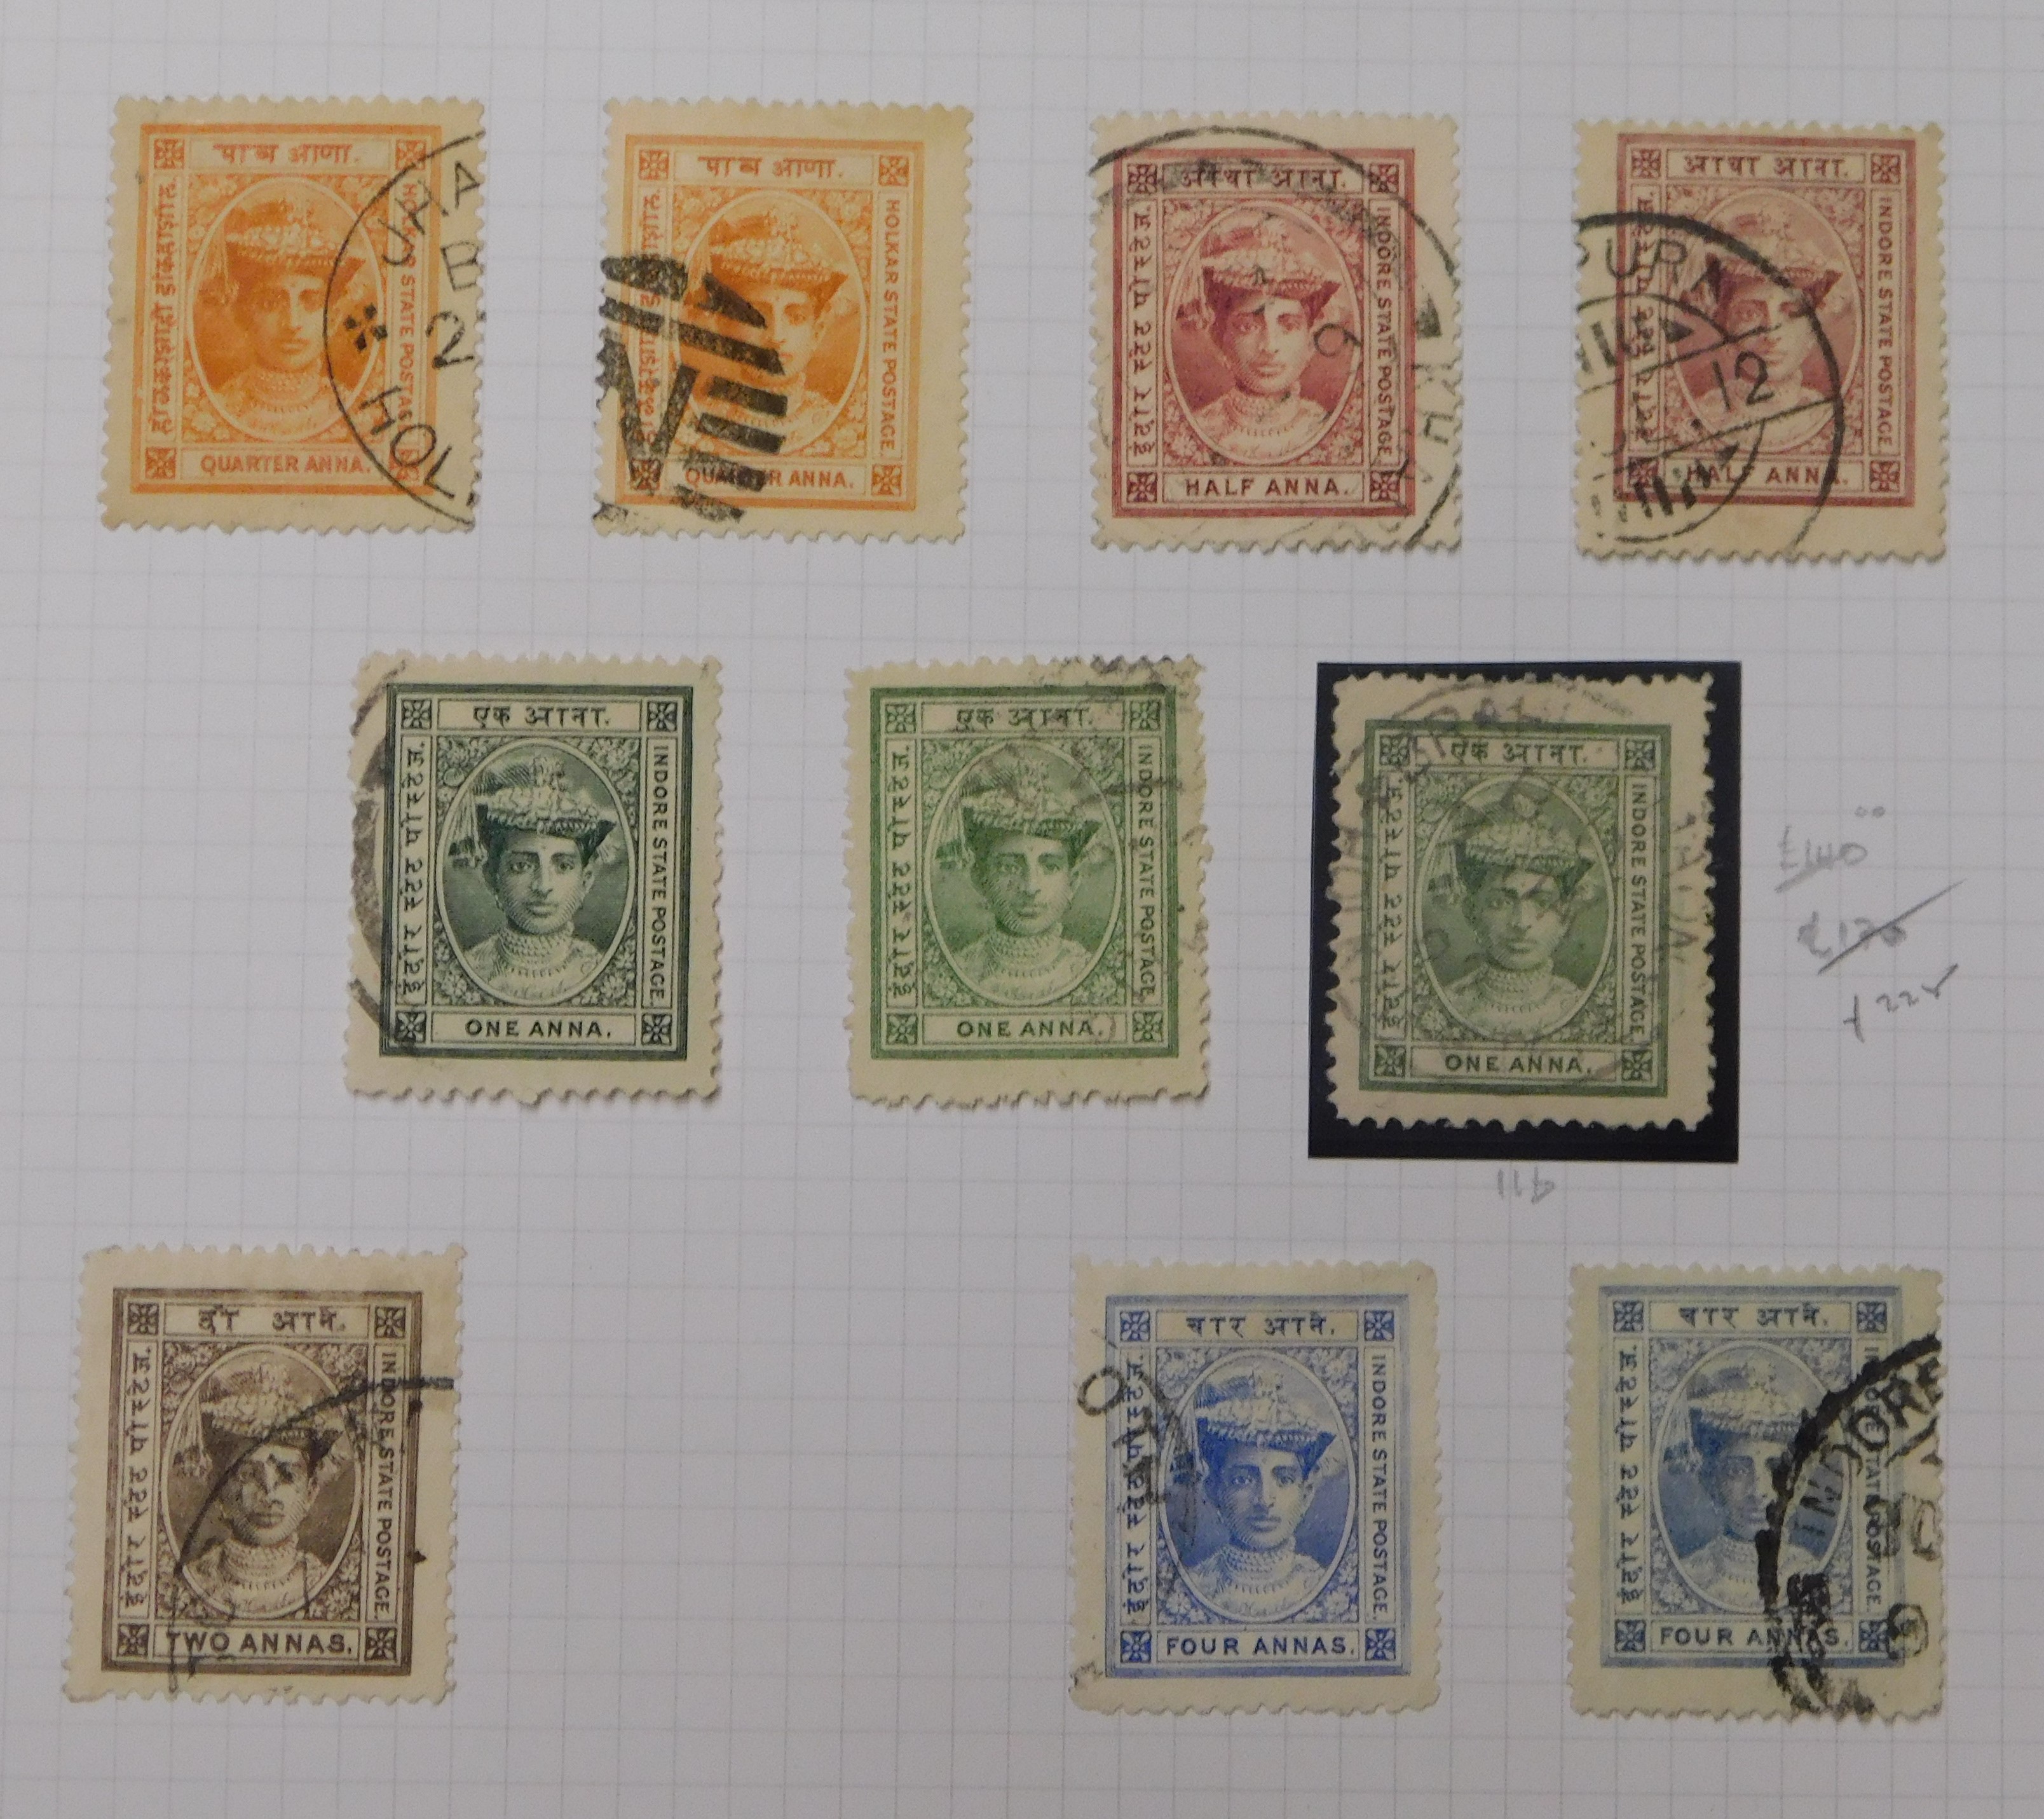 India (Indore) 1904-20 fine used, Incl SG 11b (Cat £225) and 1927 to 4 Anna (23) - Image 5 of 5